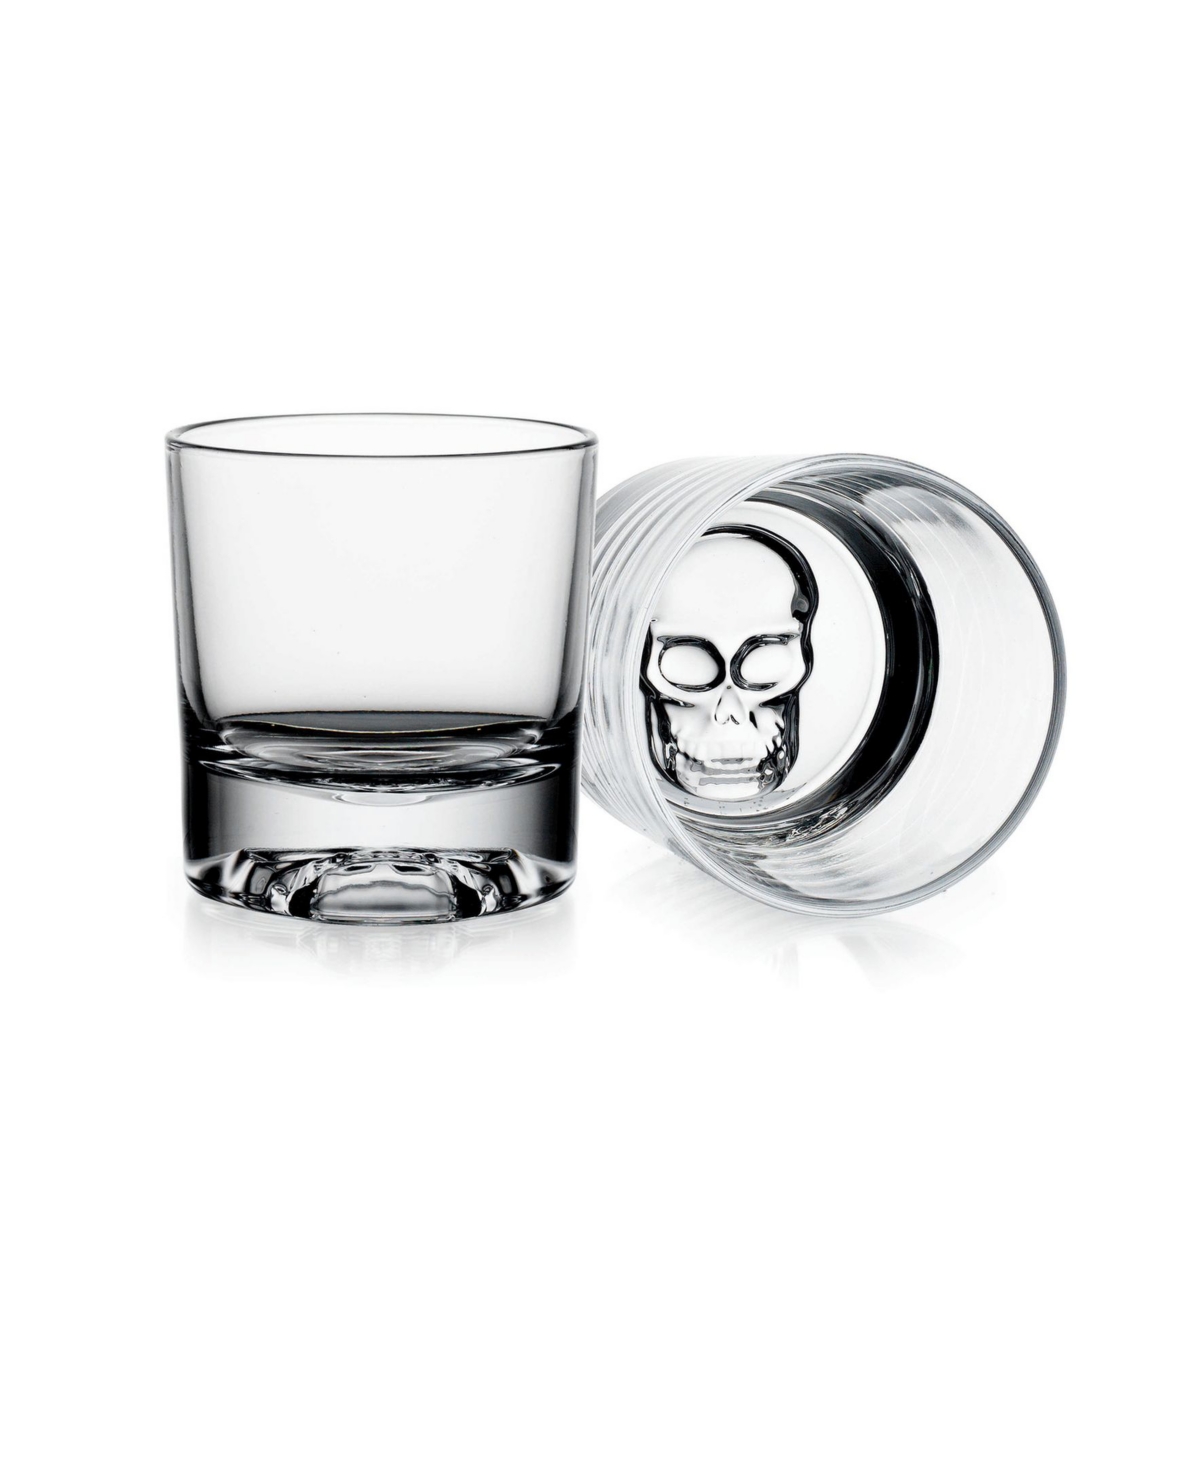 Godinger Skull Double Old-fashioned Glasses, Set Of 2 In Clear